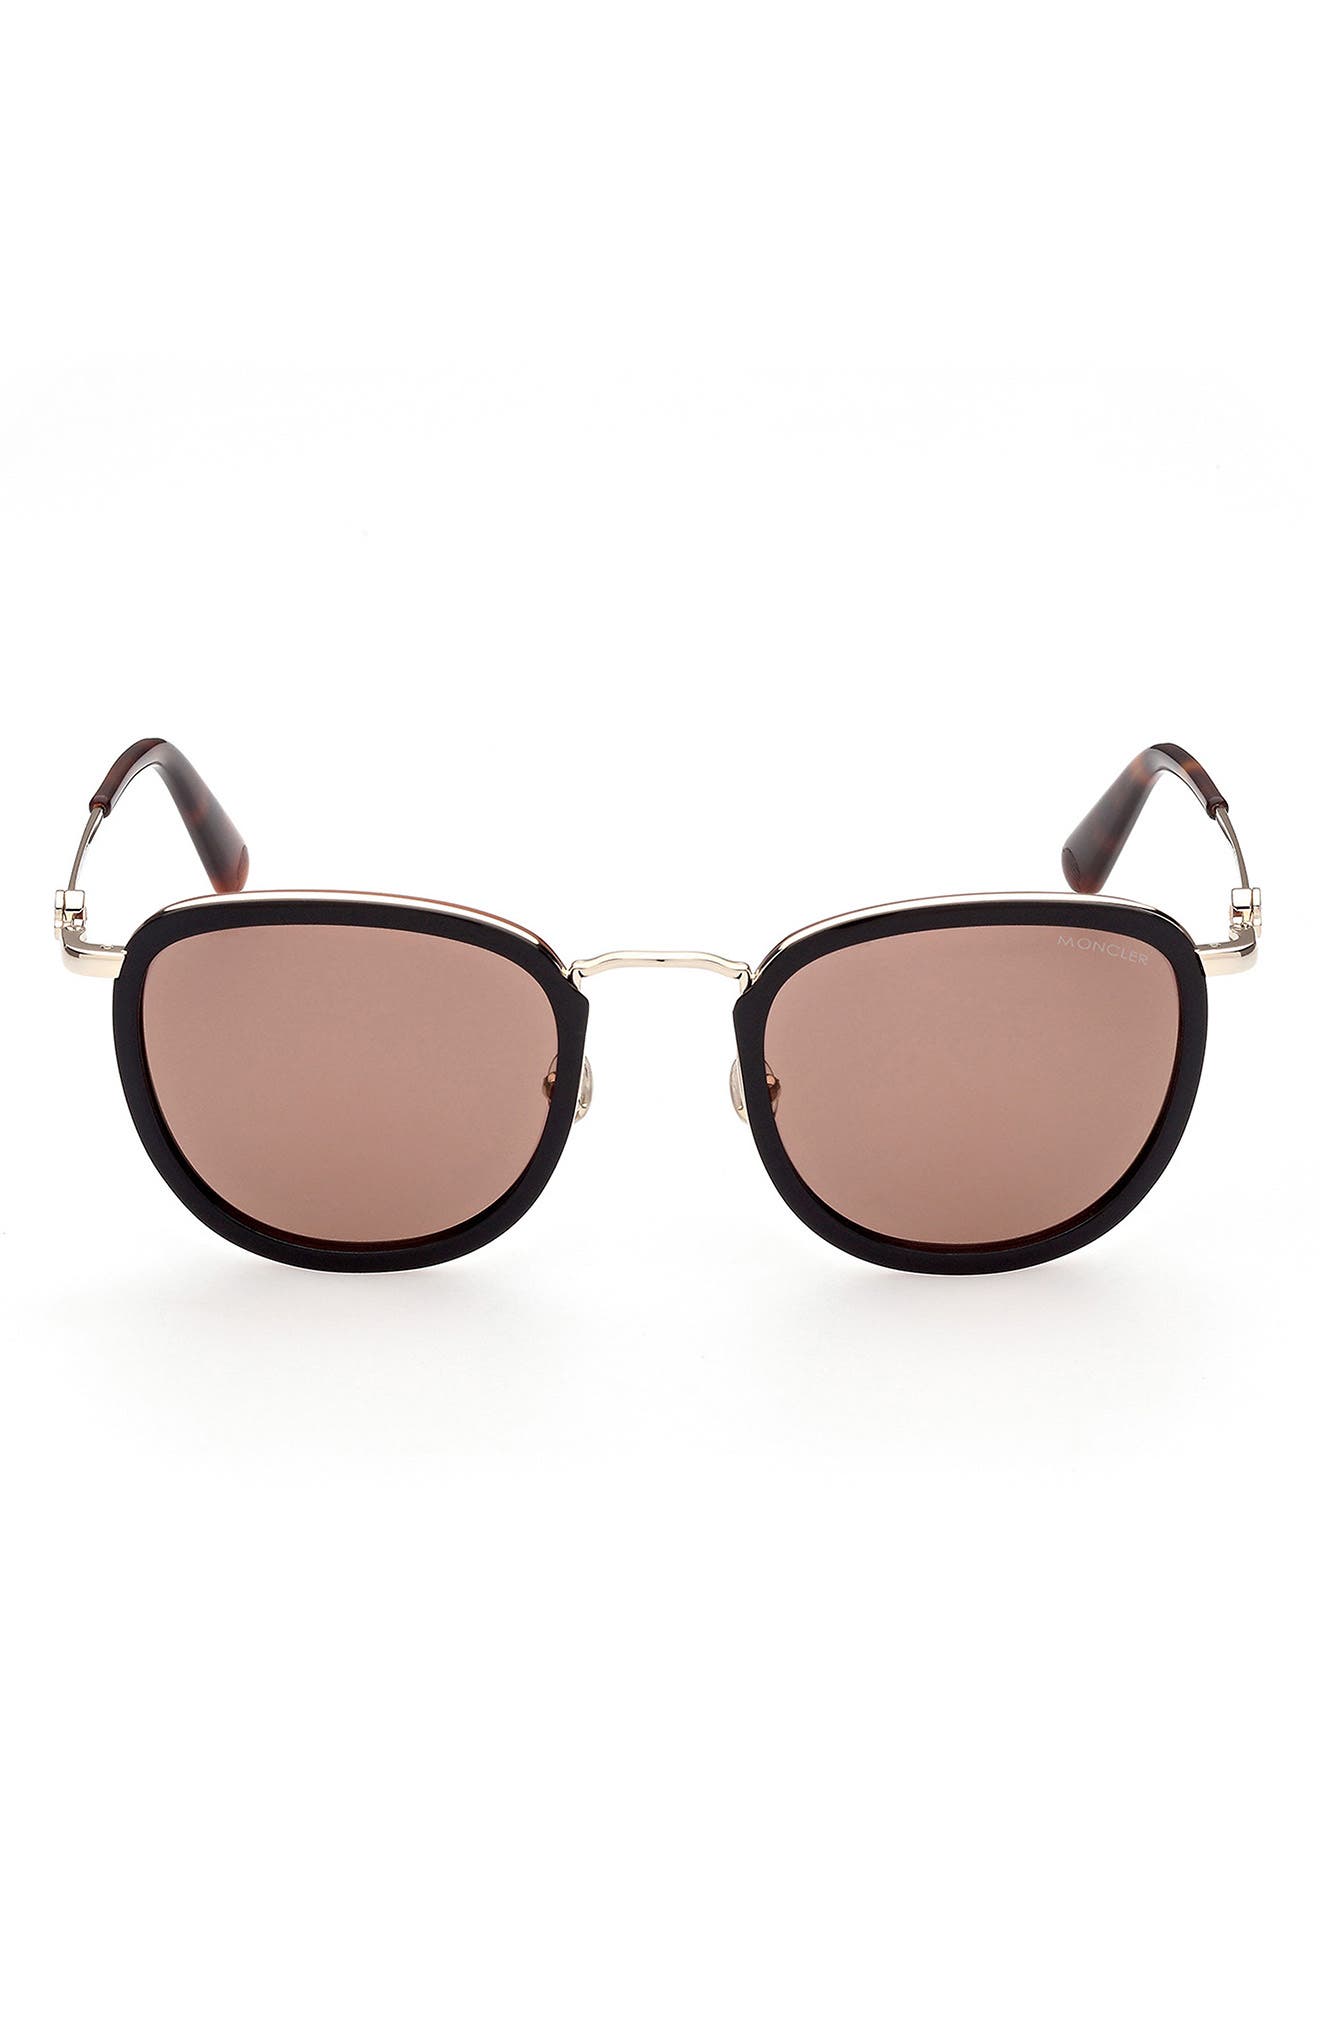 Moncler 52mm Round Sunglasses in Black/Brown at Nordstrom